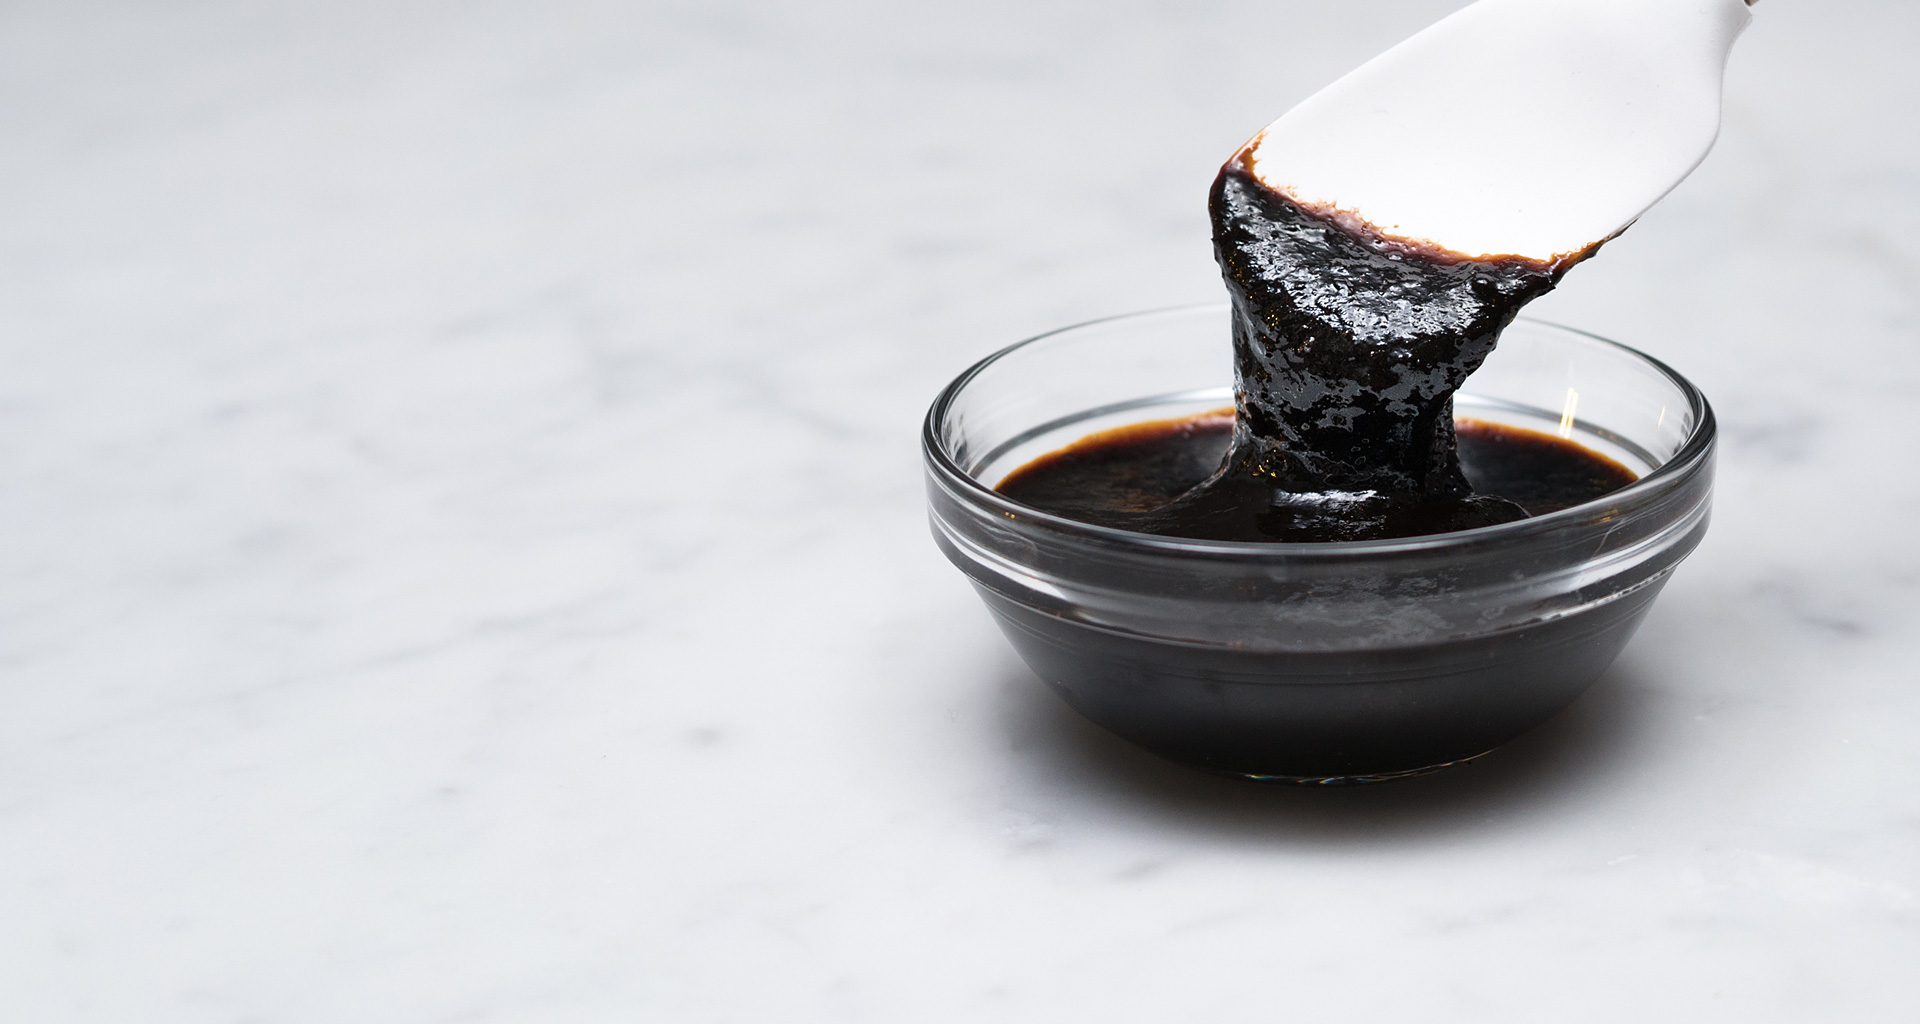 Made from a blend of Dried Plums and Prune Juice Concentrate, this prune puree is high in sorbitol and has a tangy flavor similar to molasses.